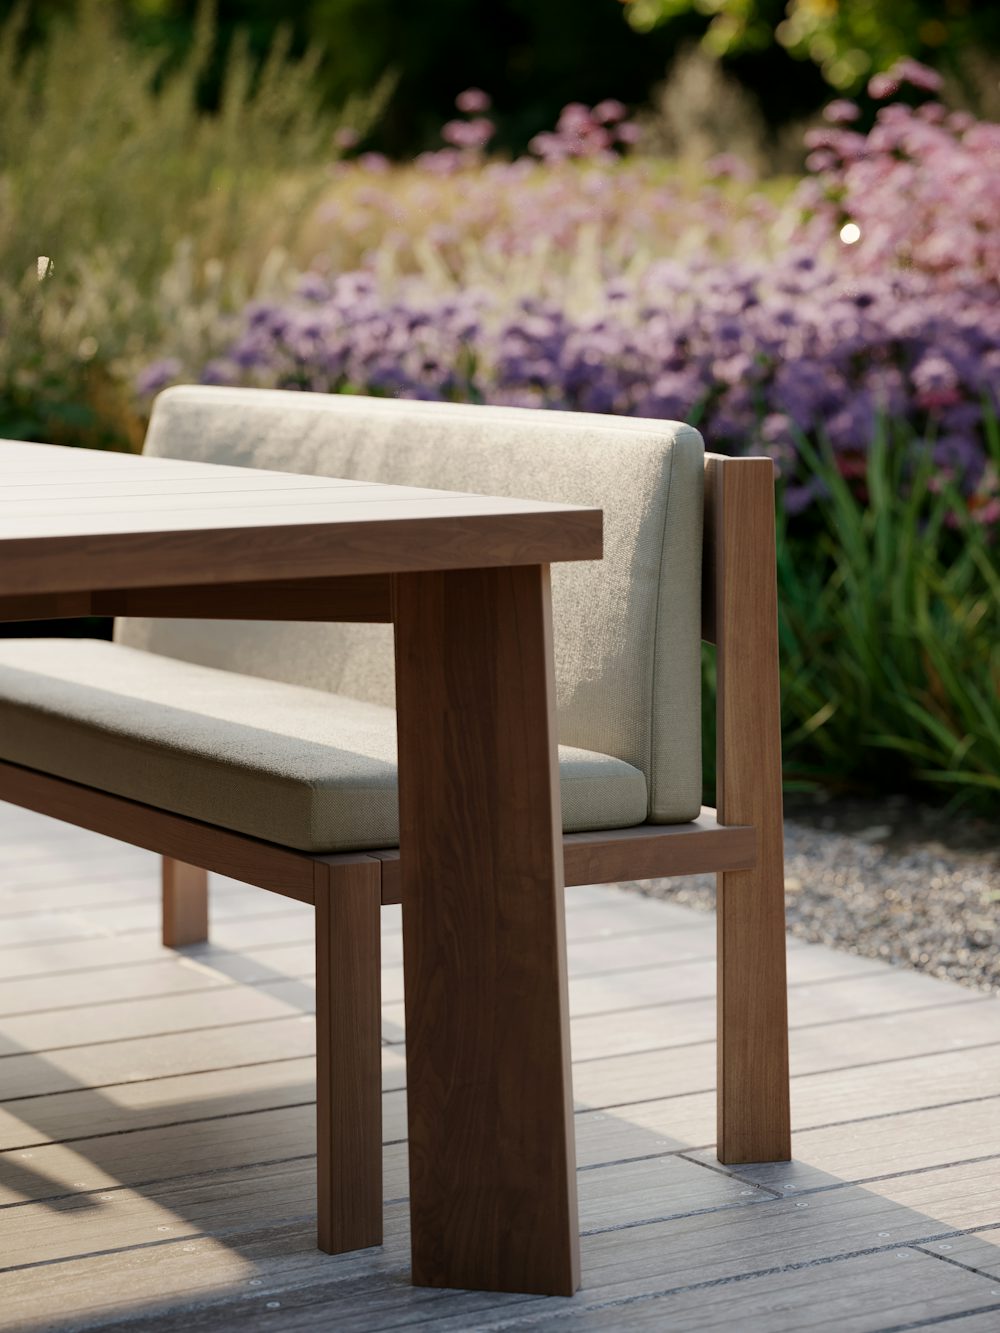 Timme Outdoor Bench Piet Boon 4